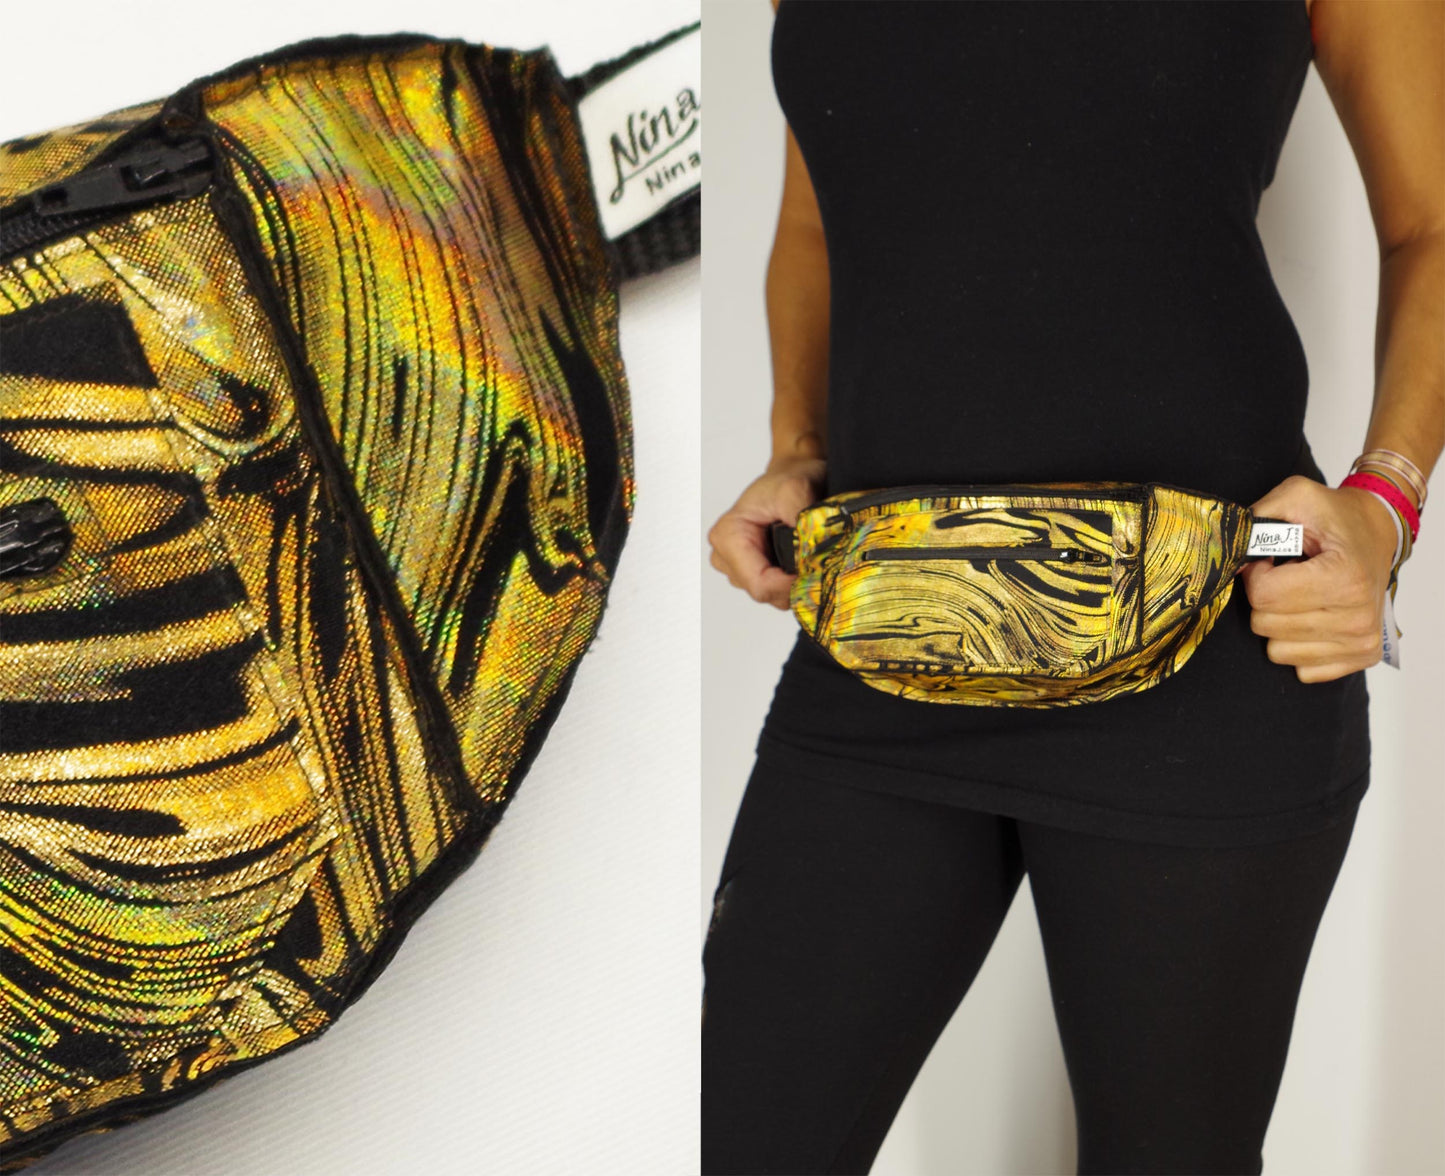 Festival Fanny Pack in Gold Iridescent Marble